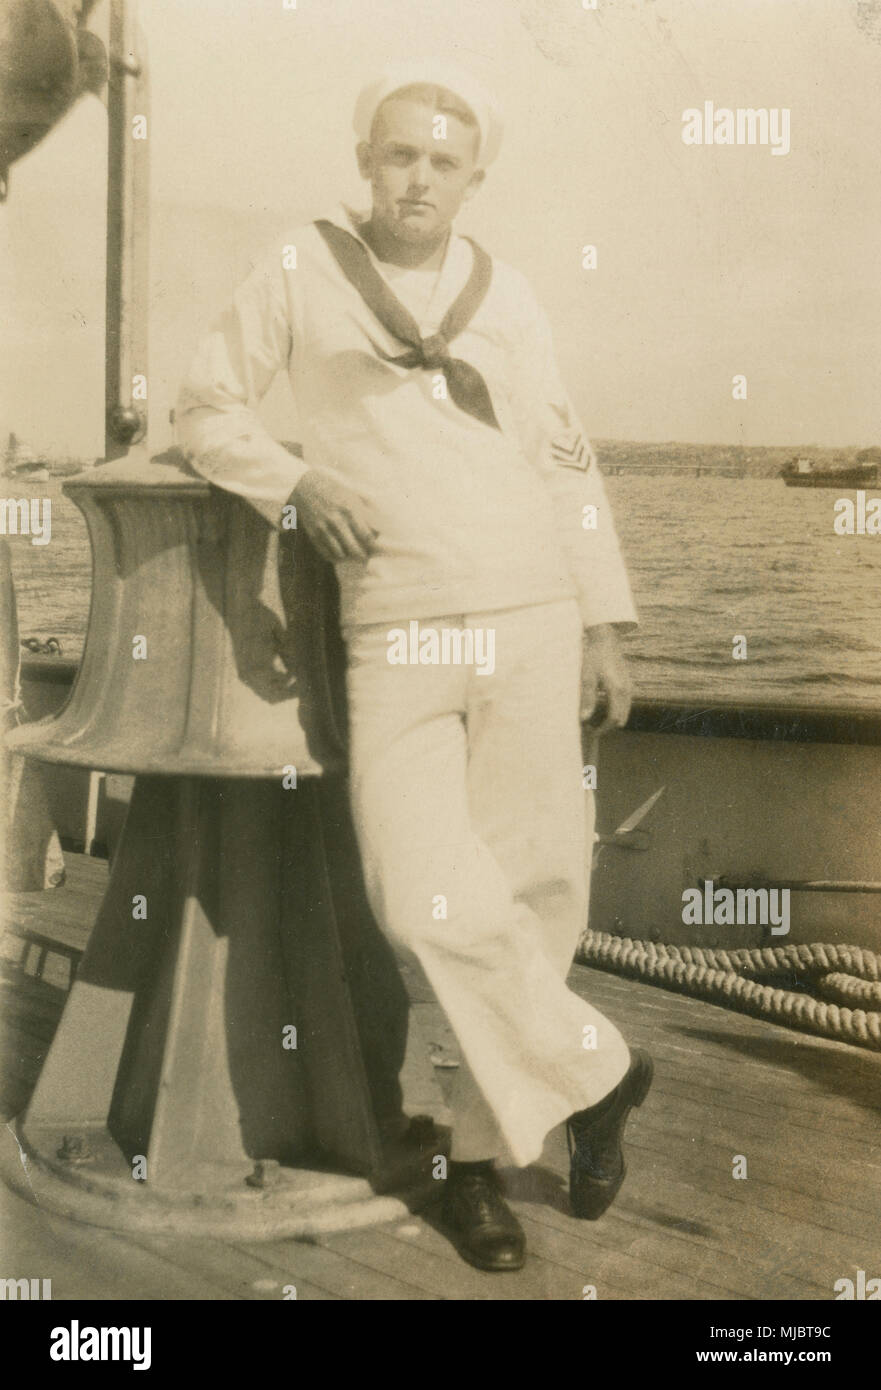 1900 Two Sailor Guys Make Out On Ship Deck Vintage Old Photos 4” x 6” Reprint